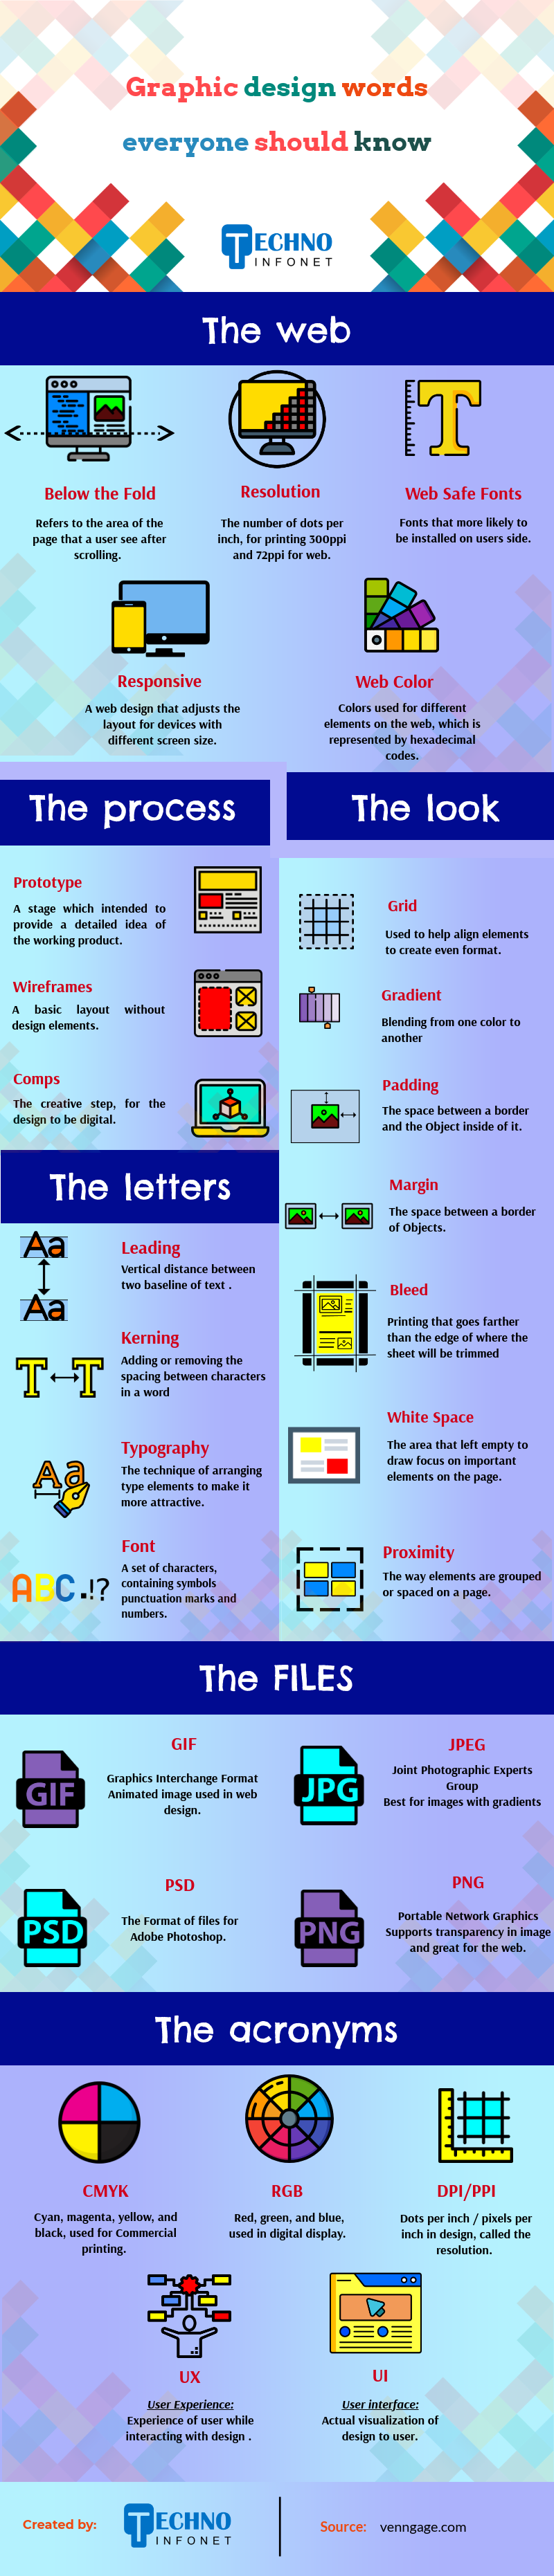 Graphic design words everyone should know